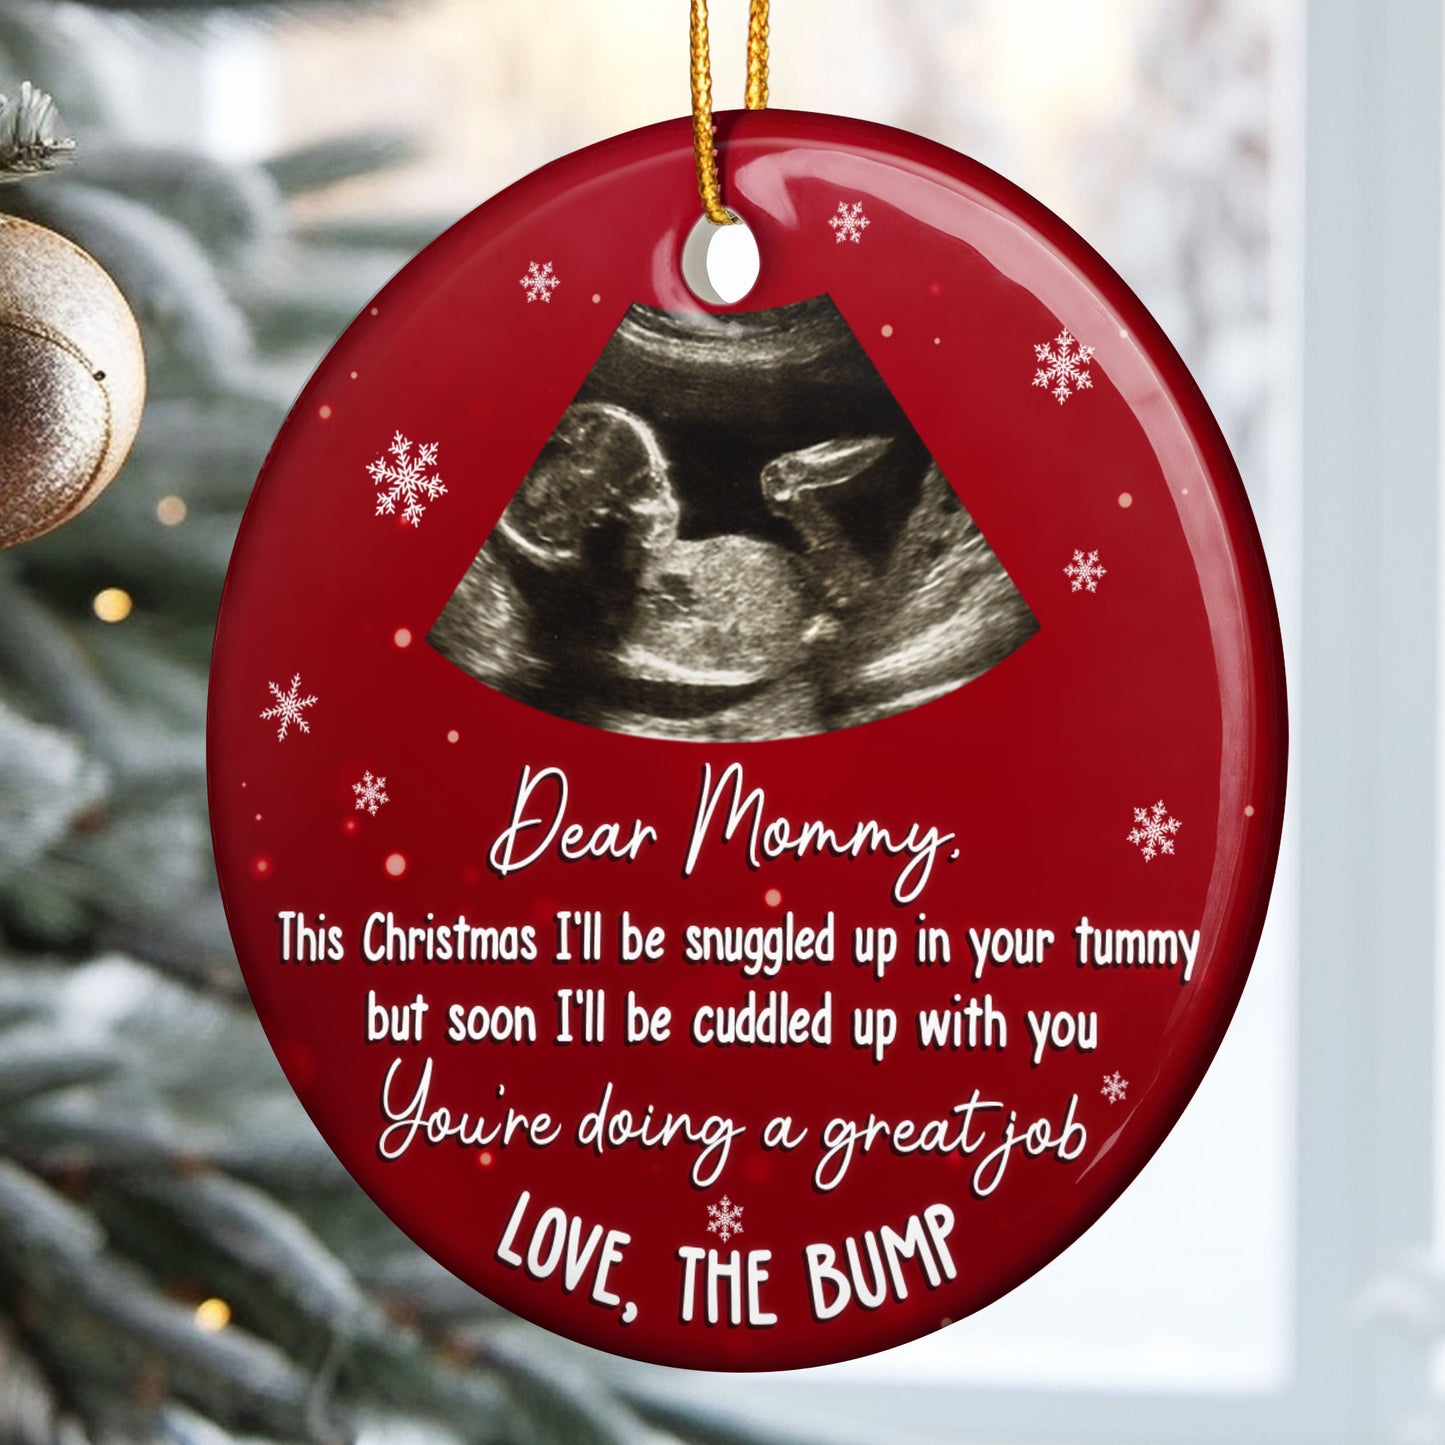 This Christmas I'll Be Snuggled - Personalized Photo Ceramic Ornament